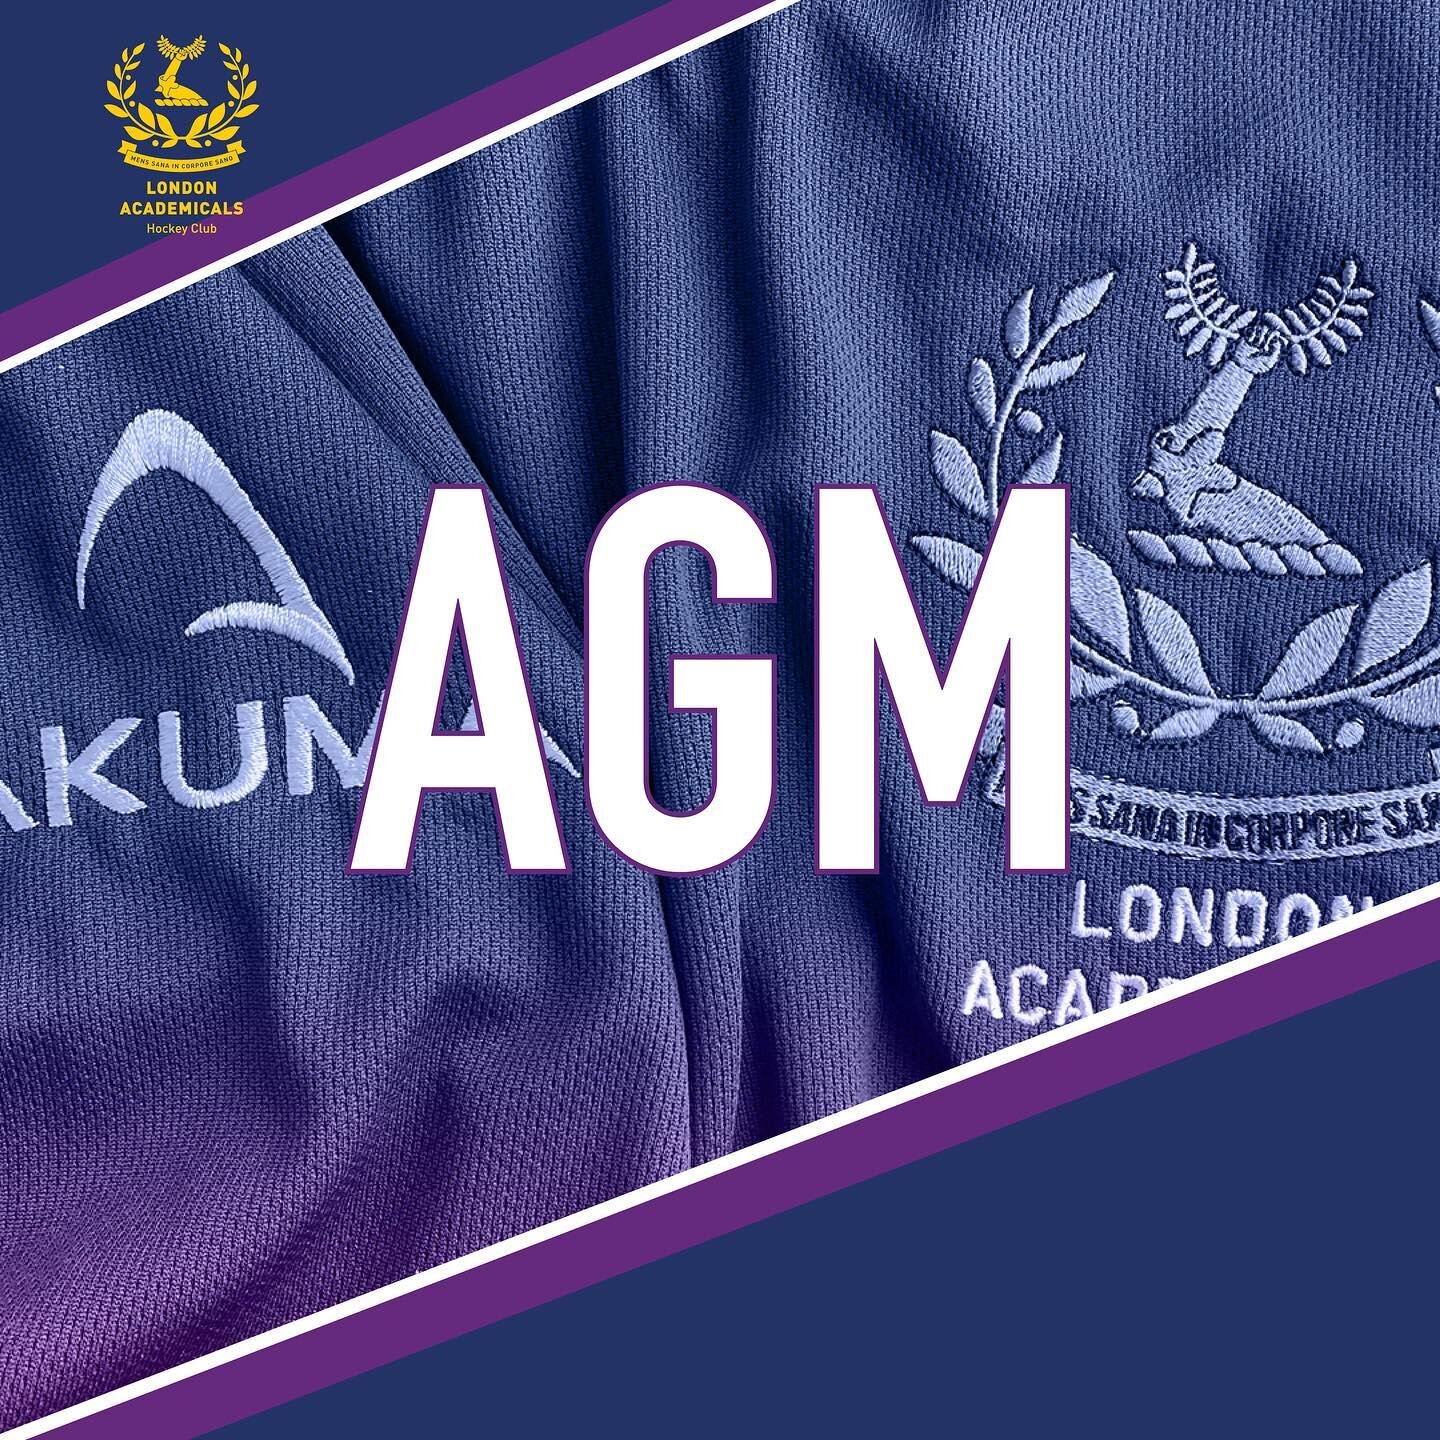 🏑 - LAHC AGM 2021⁣
📆 - 26 July 2021⁣⁣
⏰ - 7:30pm⁣⁣
📍 - Zoom⁣⁣
⁣⁣
We have a confirmed date and time for this year&rsquo;s Annual General Meeting. We will host the meeting on Zoom again this year and have the social aspect later in the summer as Gov